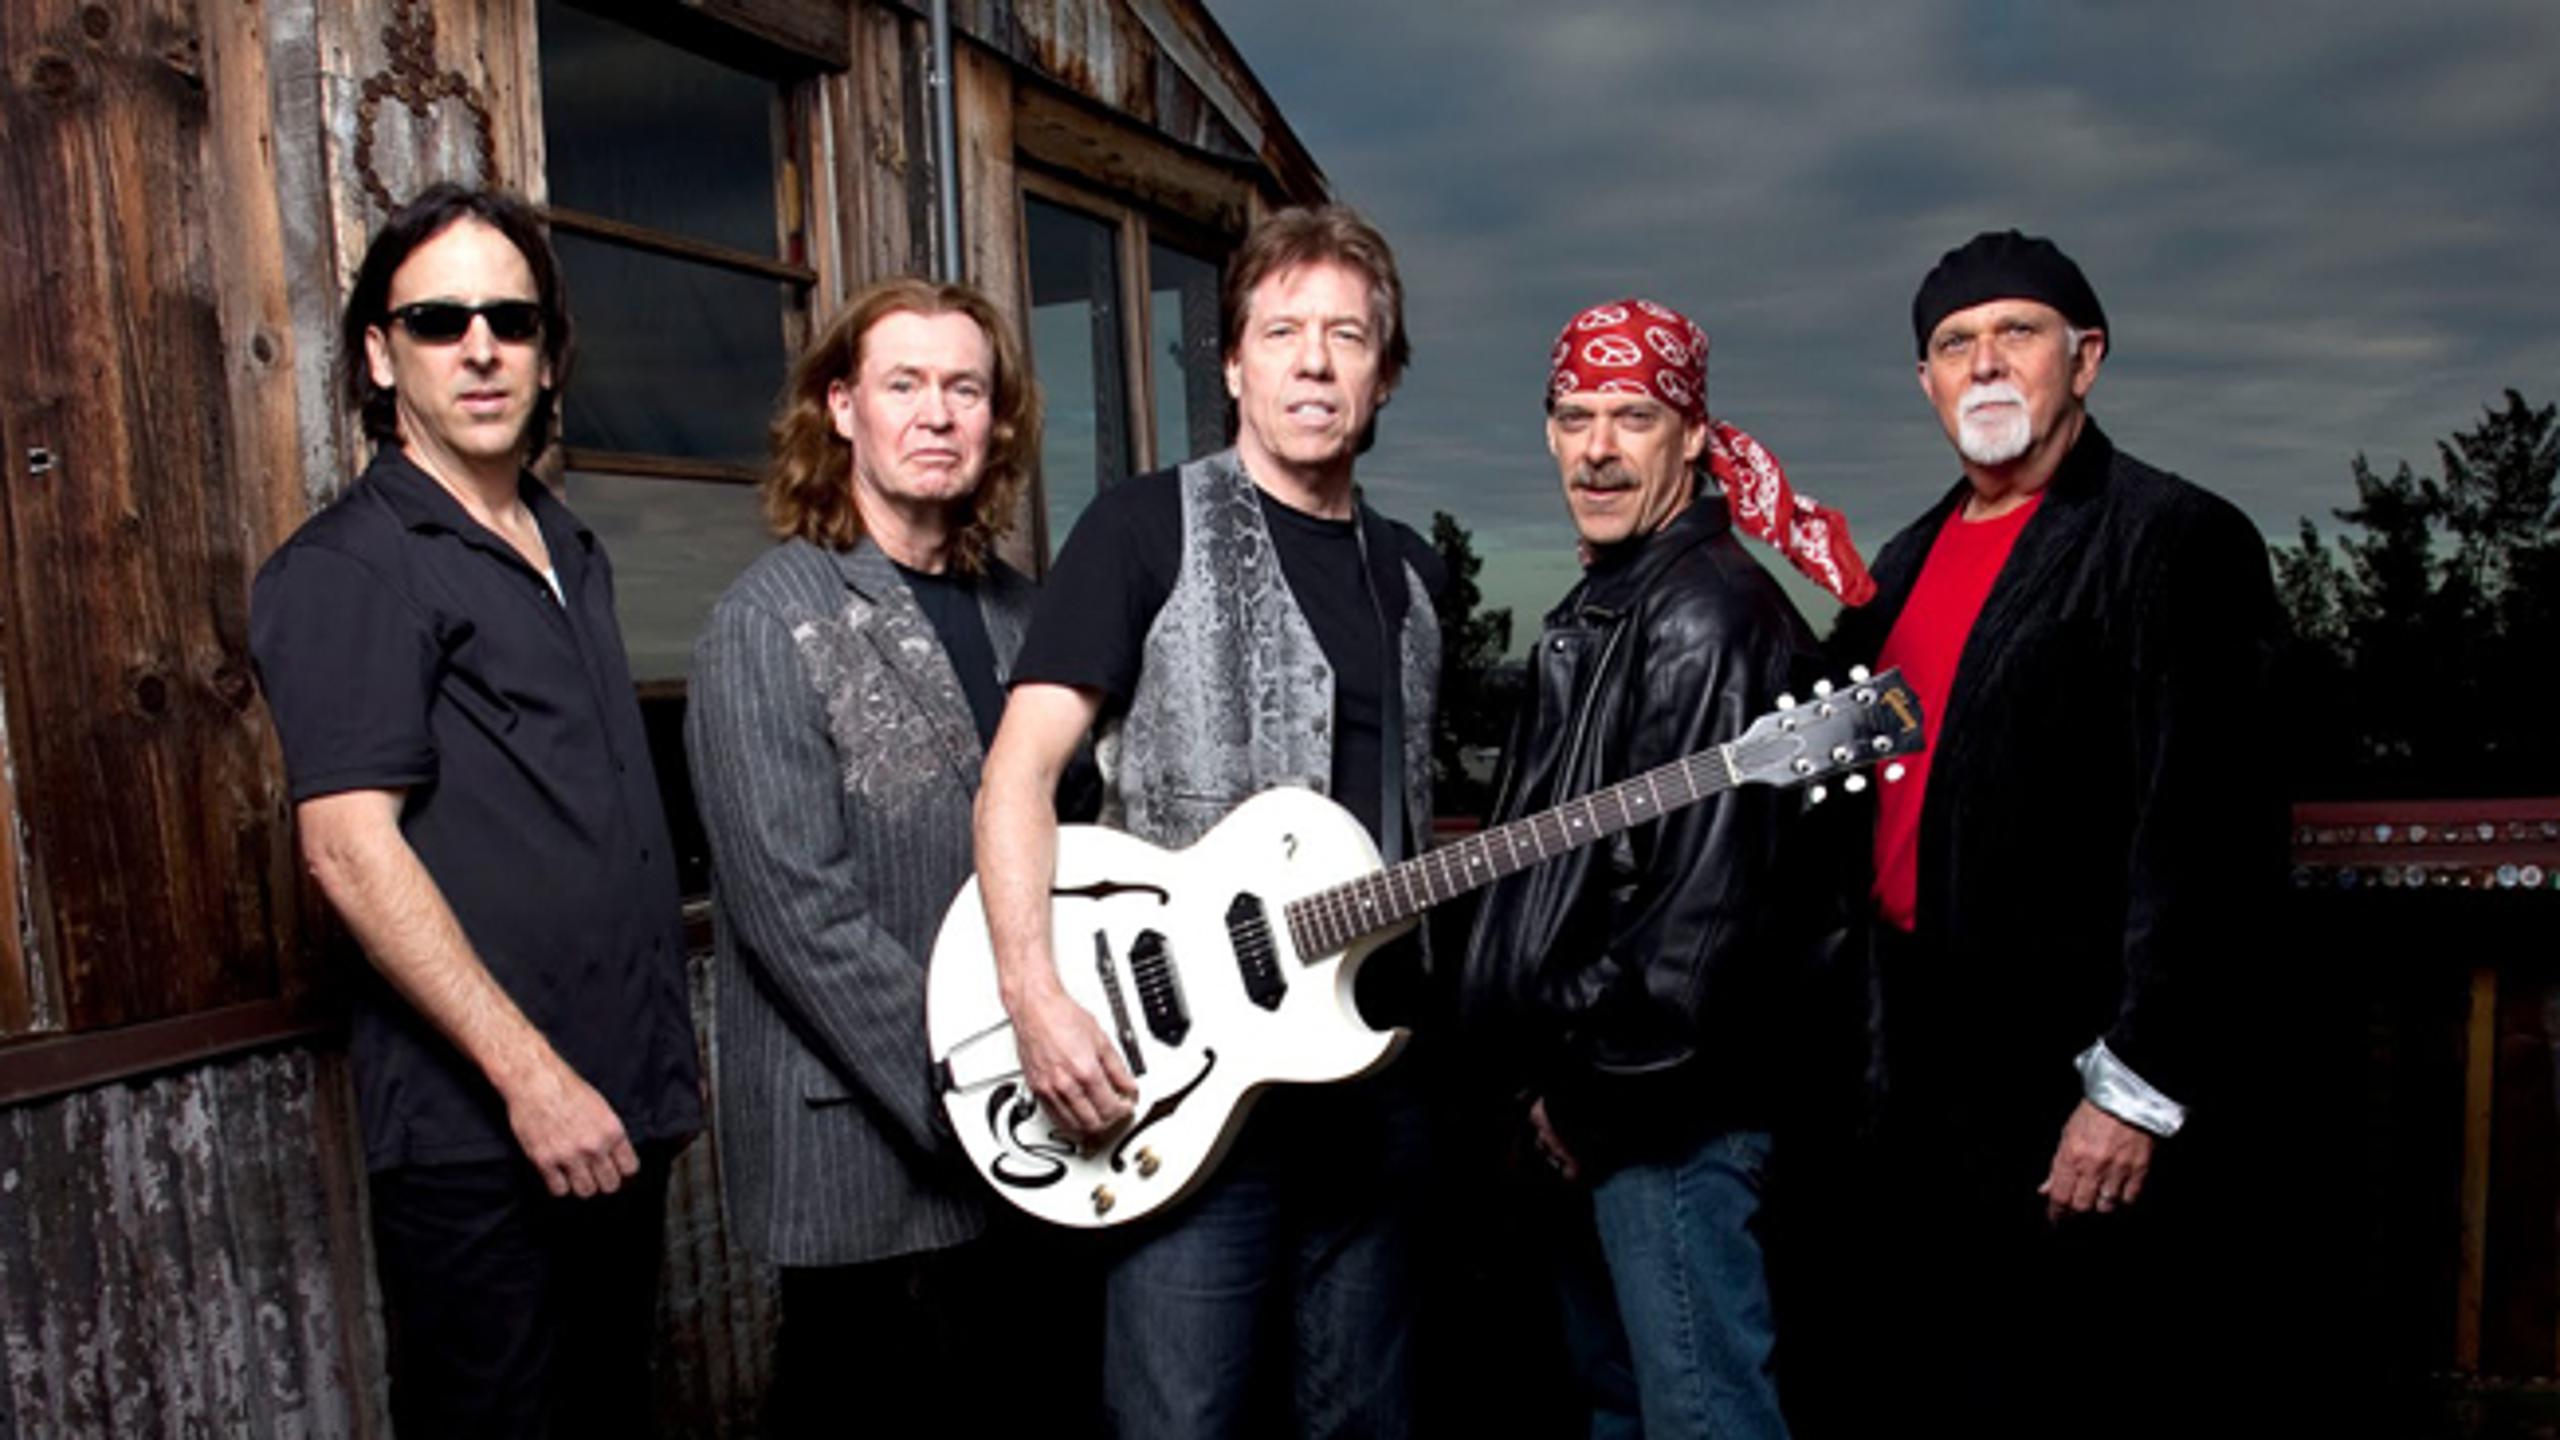 George Thorogood The Destroyers 1646302068.3952217.2560x1440 